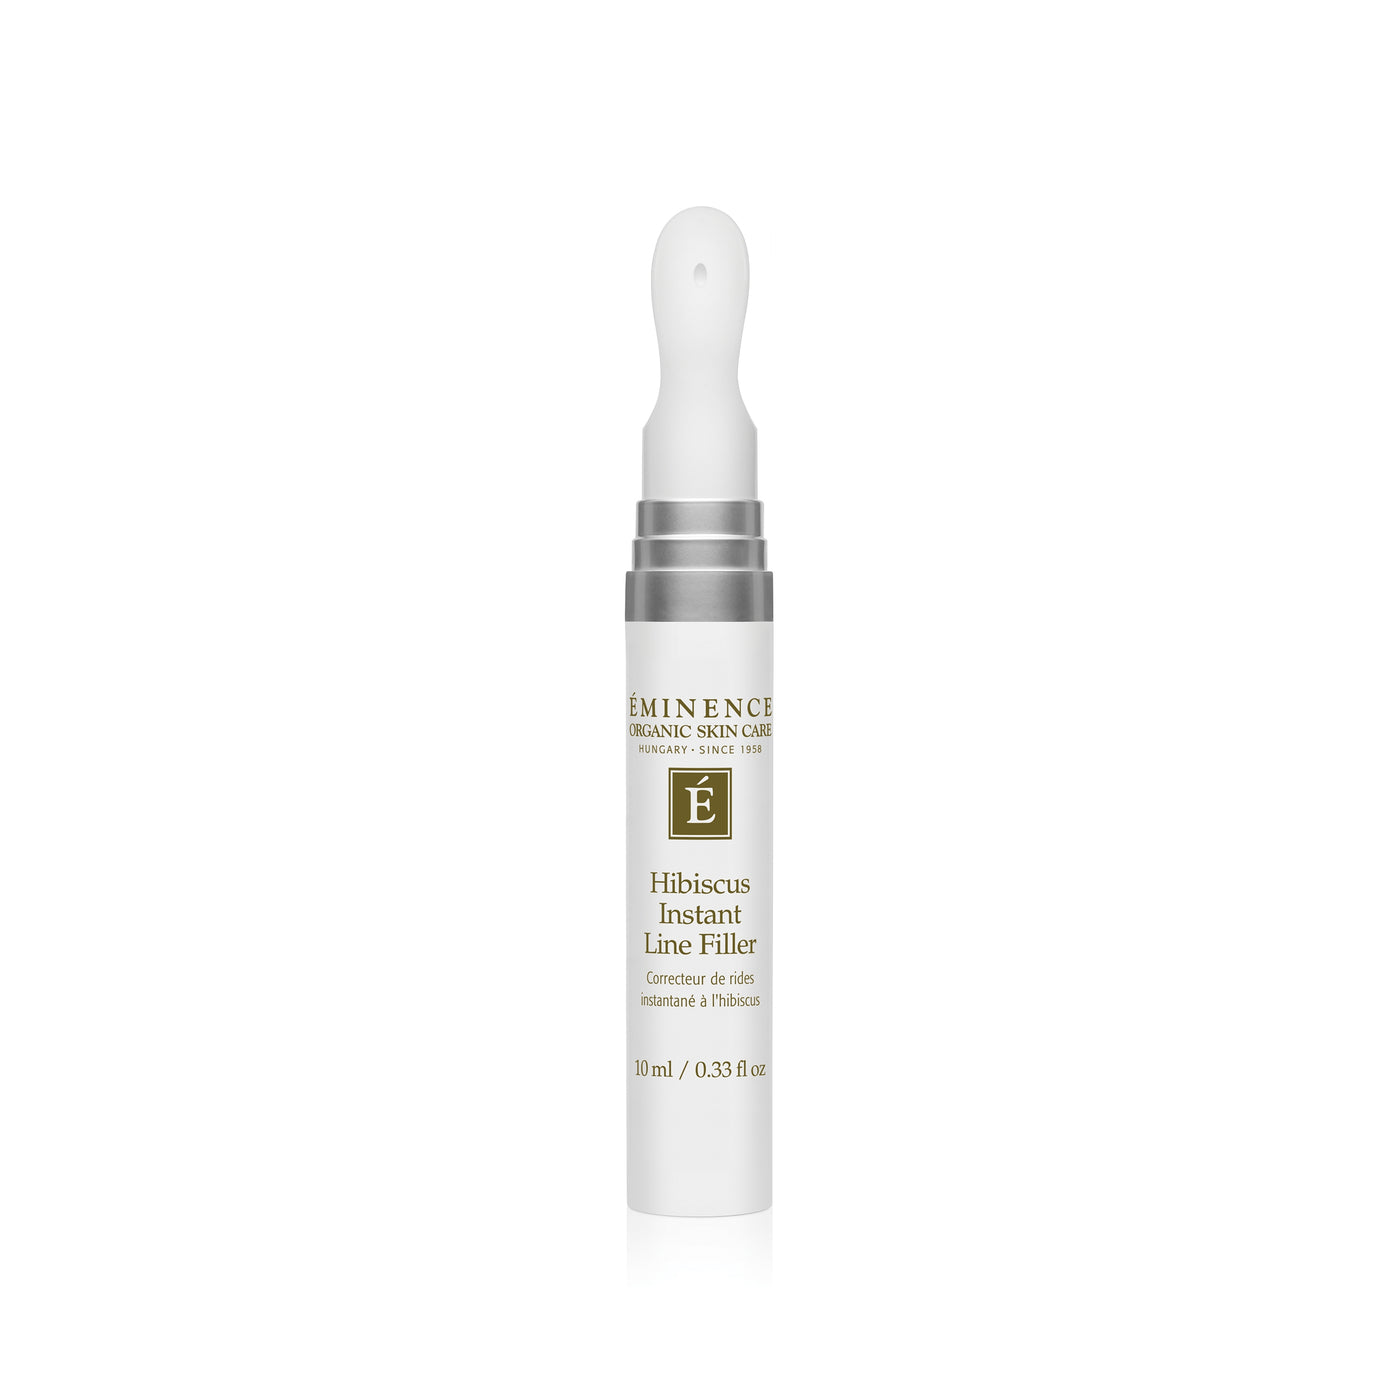 Eminence Organics Hibiscus Instant Line Filler - Radiance Clean Beauty